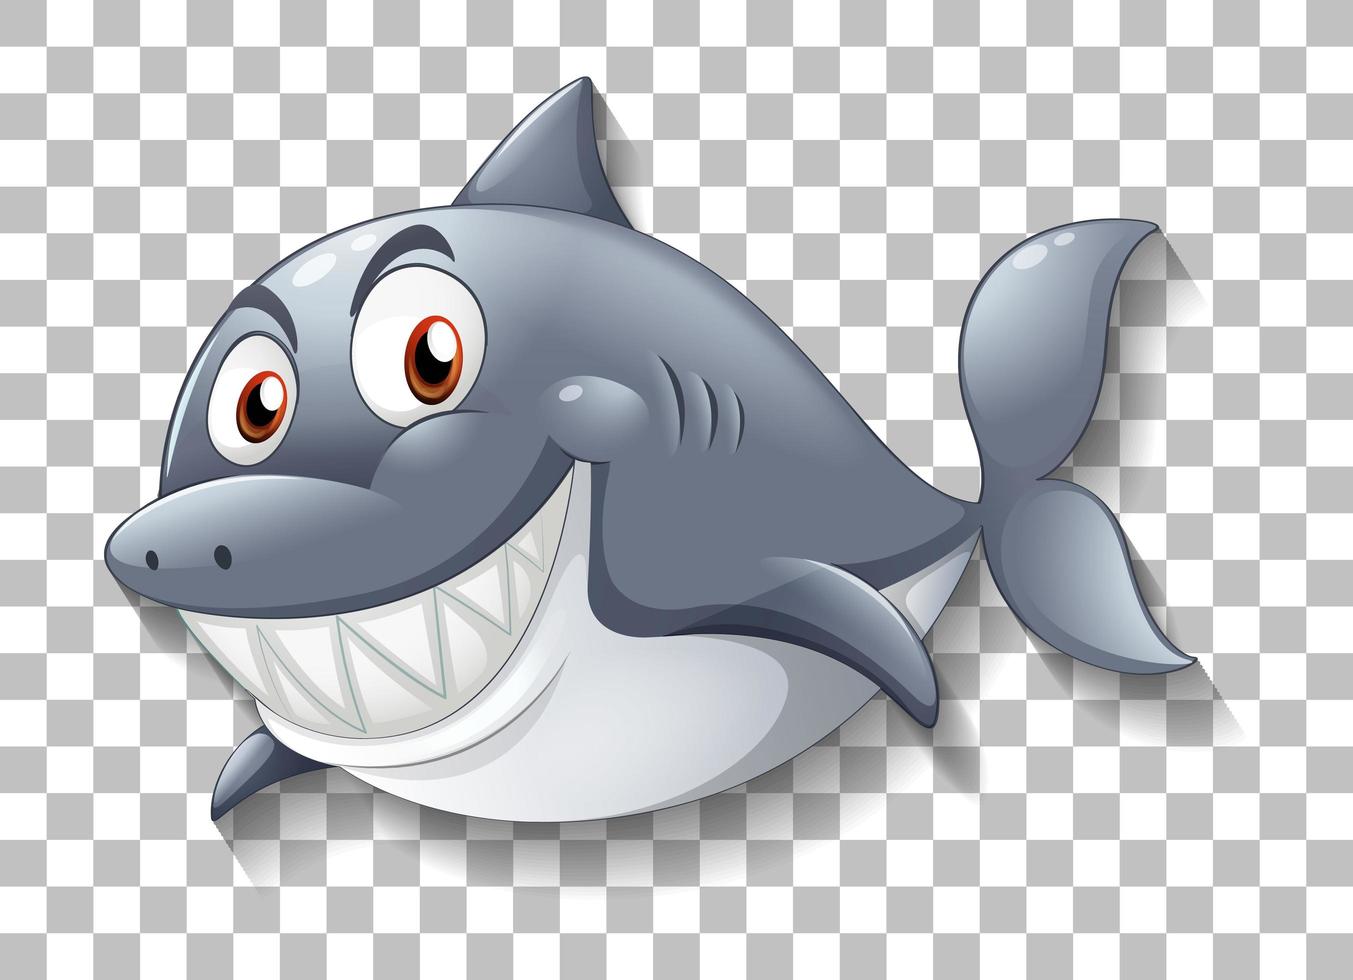 Shark smiling cartoon character on transparent background vector